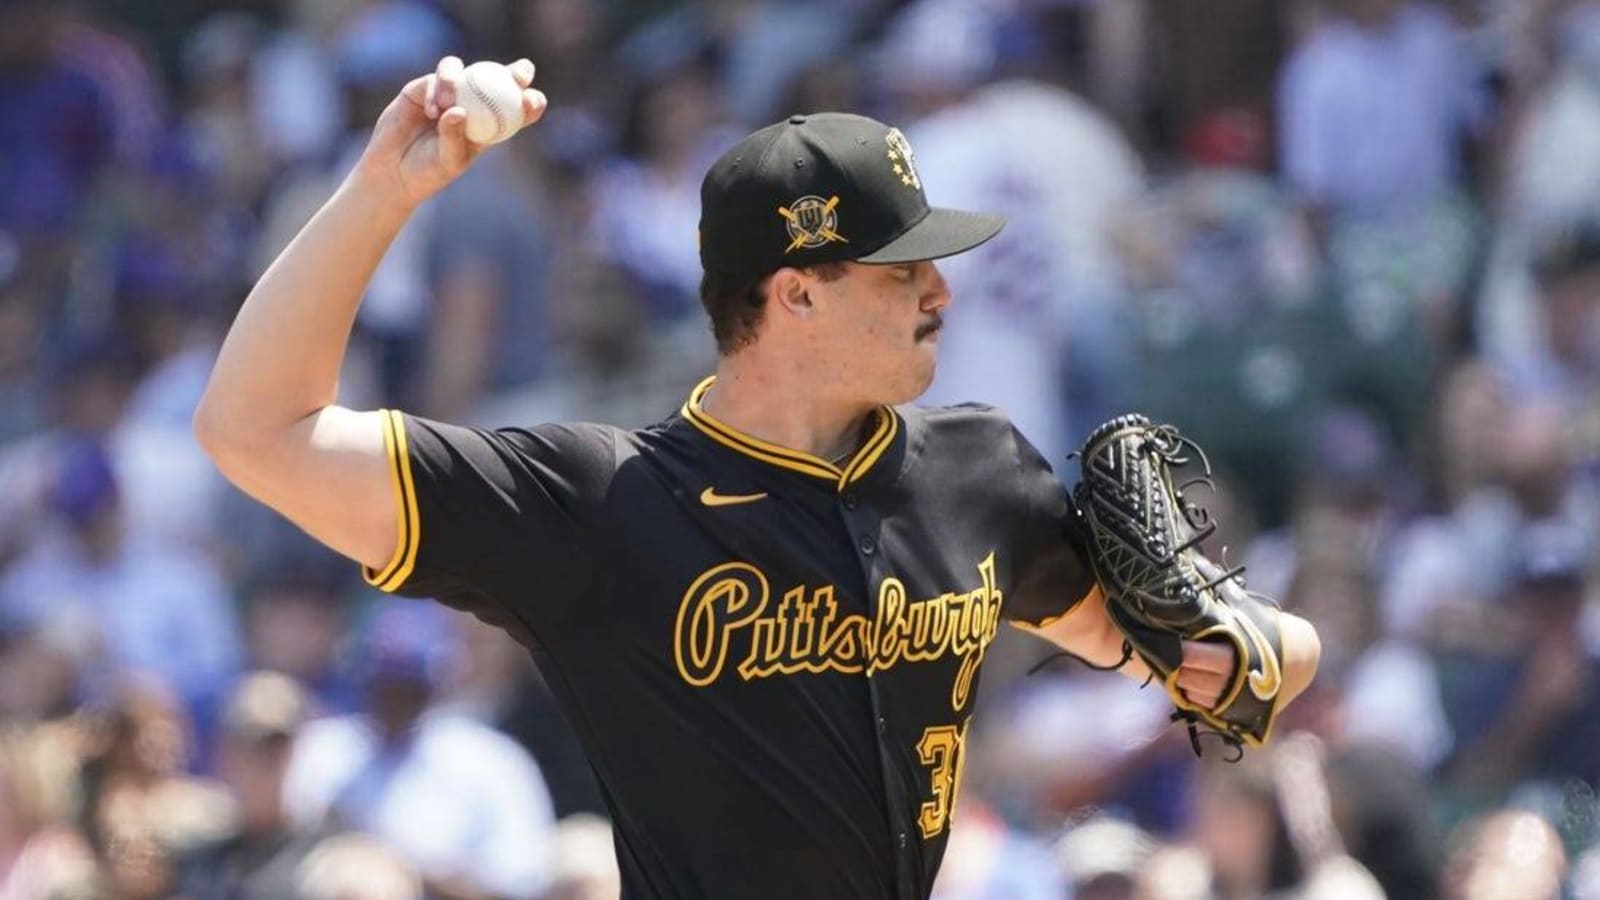 Paul Skenes fans 11 in six no-hit innings, leads Pirates past Cubs